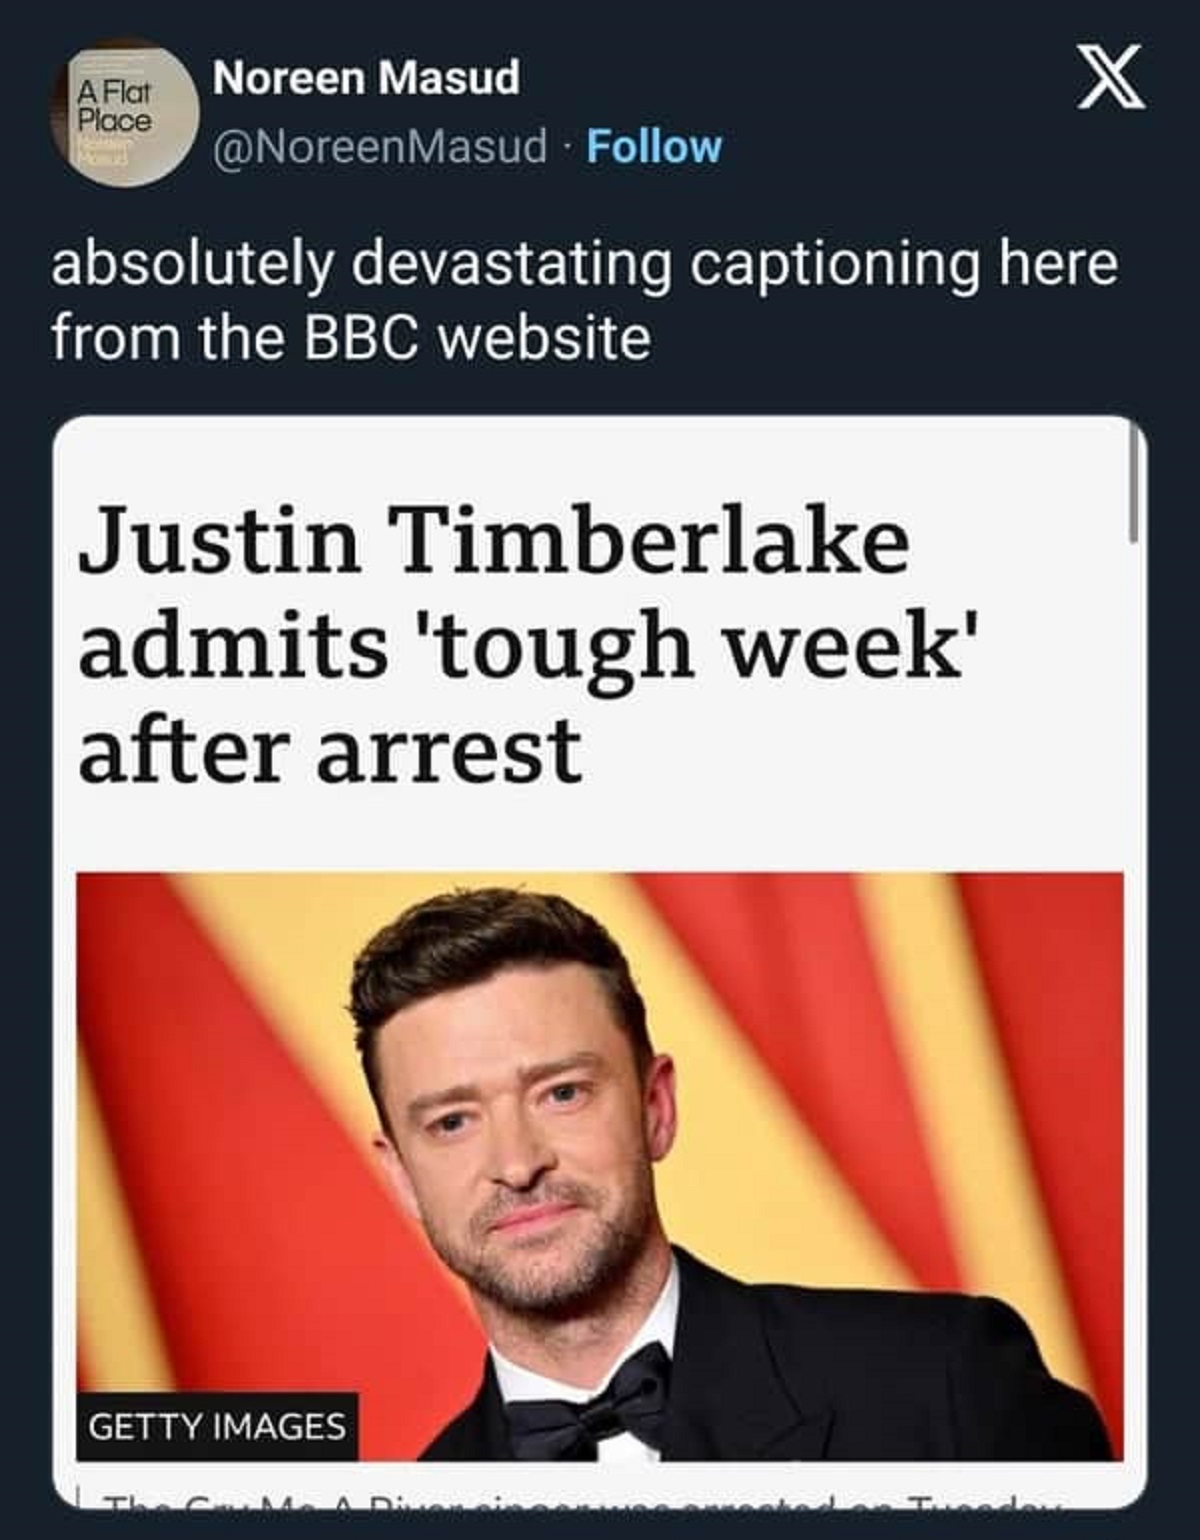 justin timberlake 2024 - A Flat Place Noreen Masud X absolutely devastating captioning here from the Bbc website Justin Timberlake admits 'tough week' after arrest Getty Images